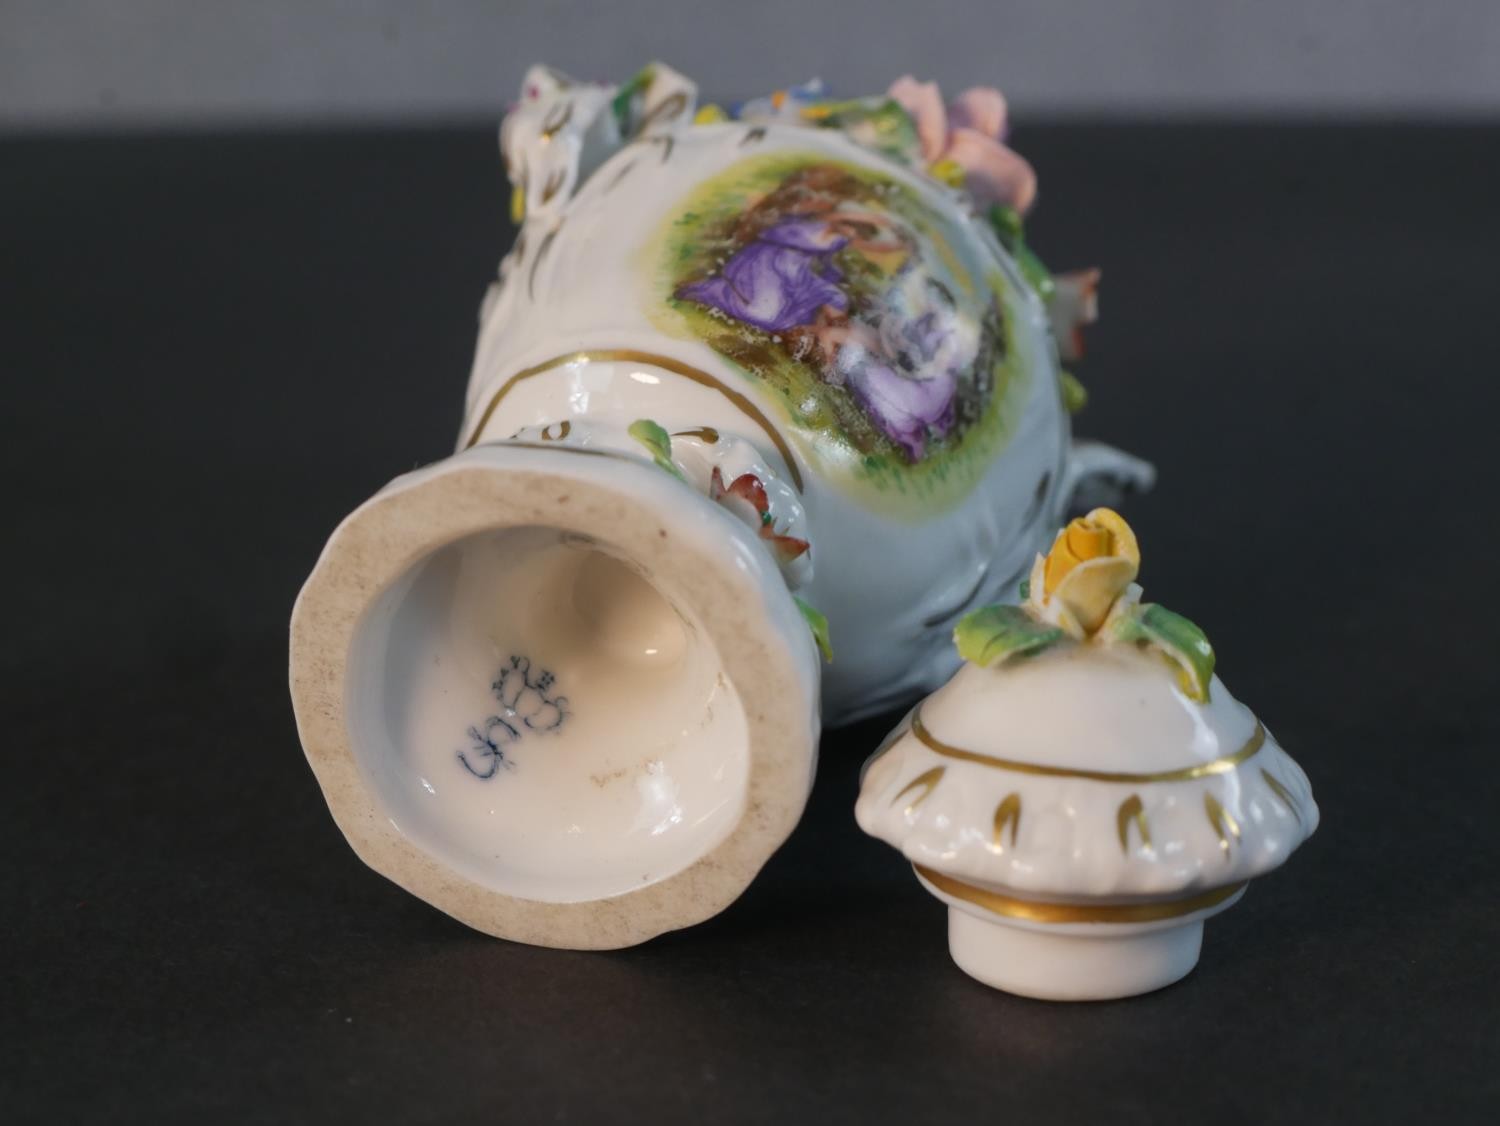 Three 19th century hand painted porcelain urns, one with gilded rams head handles and rose design ( - Image 5 of 6